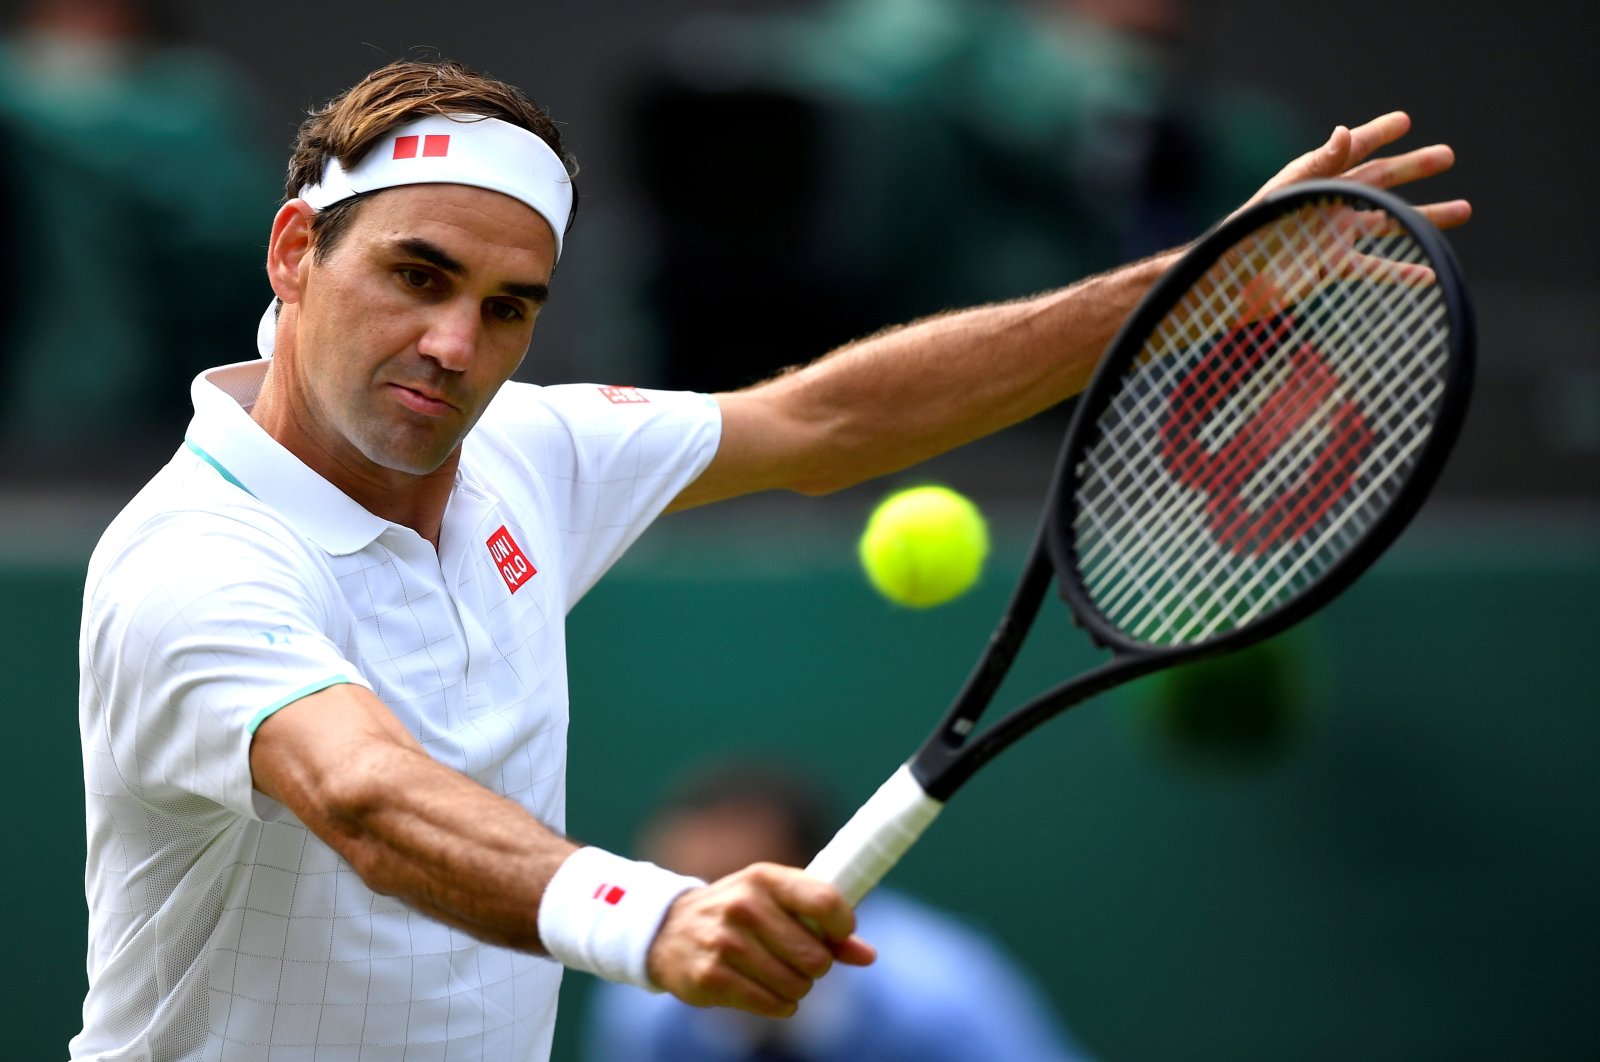 Switzerland's Roger Federer in action during his Wimbledon third-round match against Britain's Cameron Norrie, London, England, July 3, 2021, (Reuters Photo)